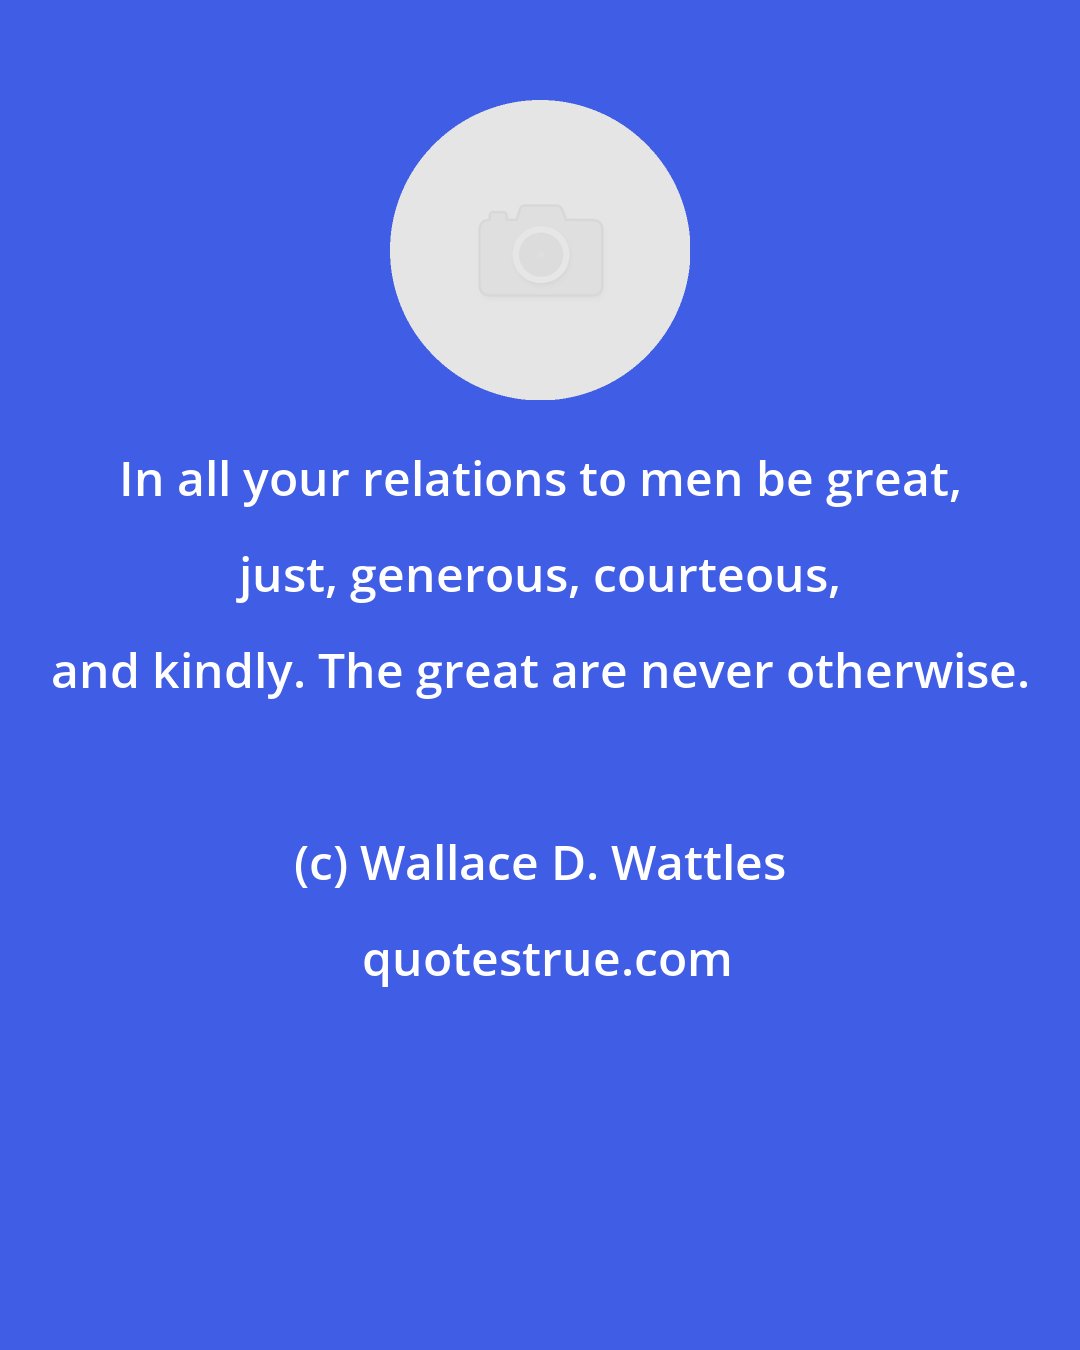 Wallace D. Wattles: In all your relations to men be great, just, generous, courteous, and kindly. The great are never otherwise.